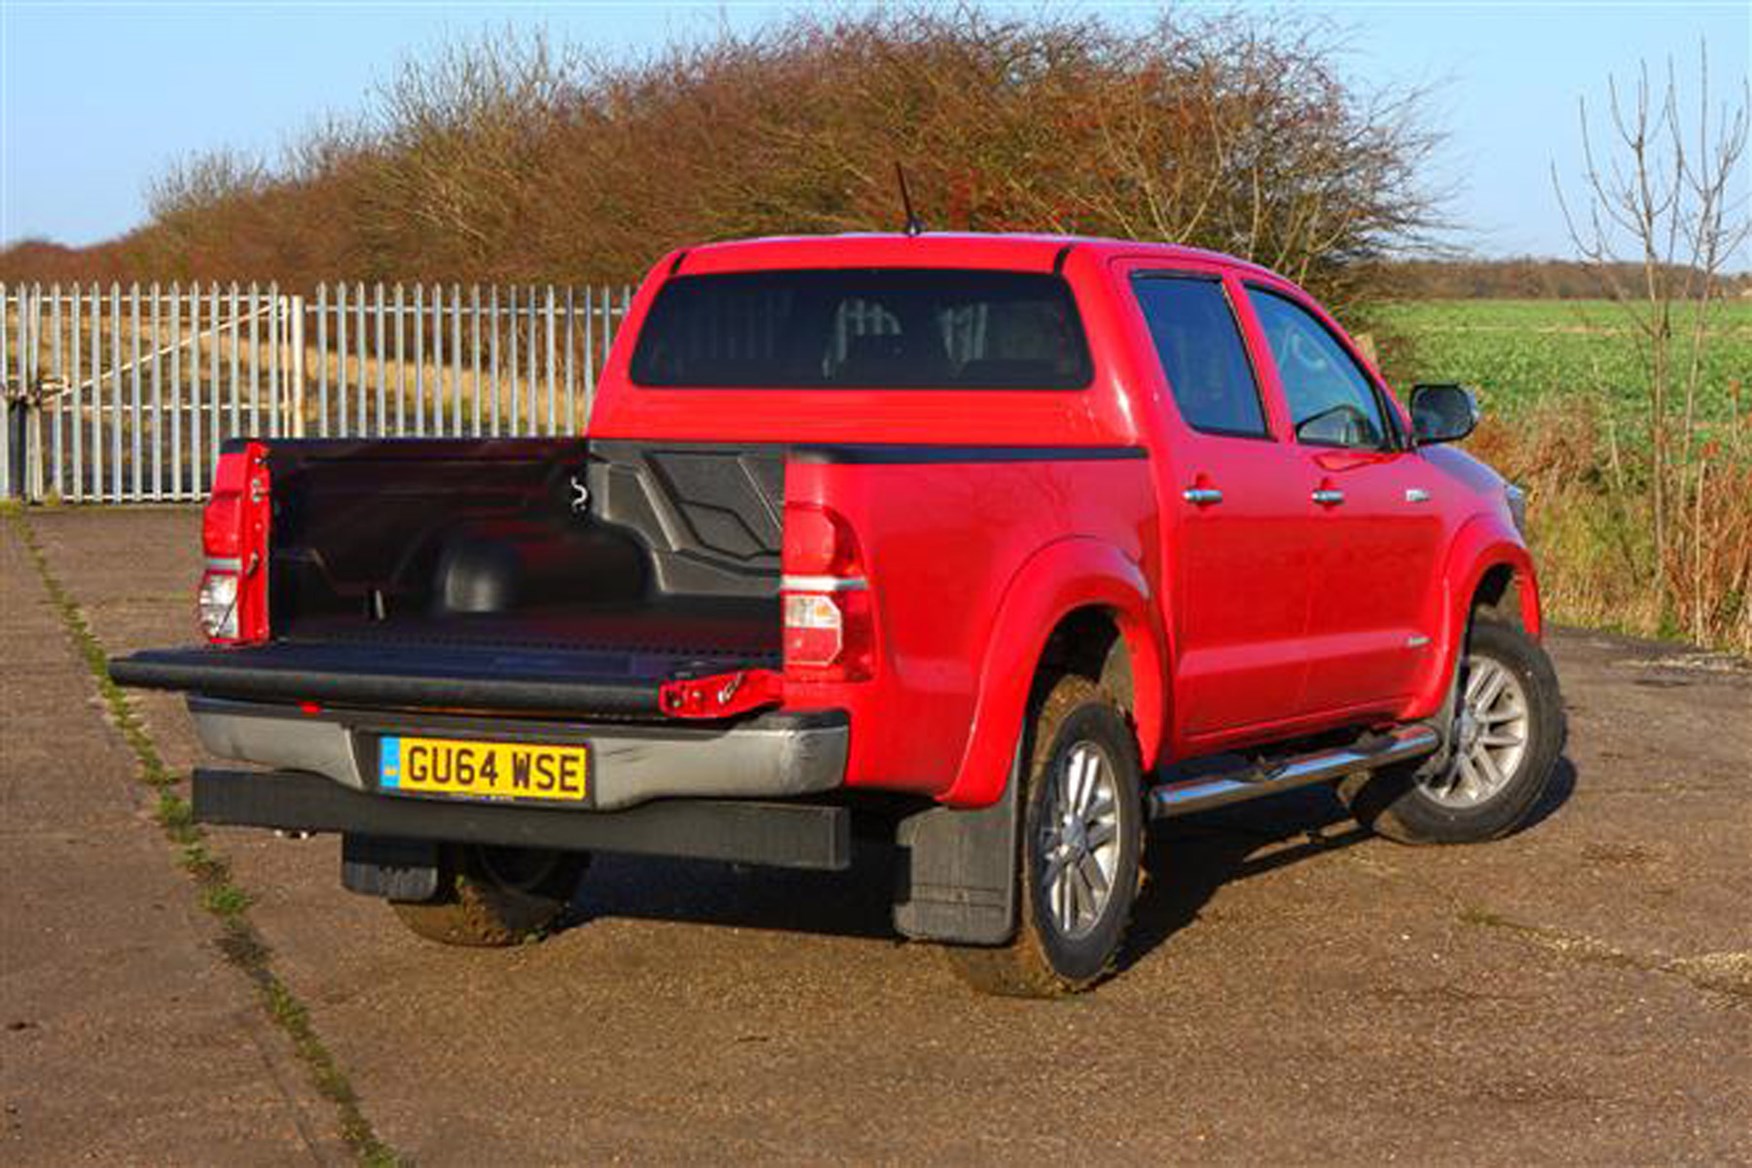 Toyota Hilux review on Parkers Vans - load area access